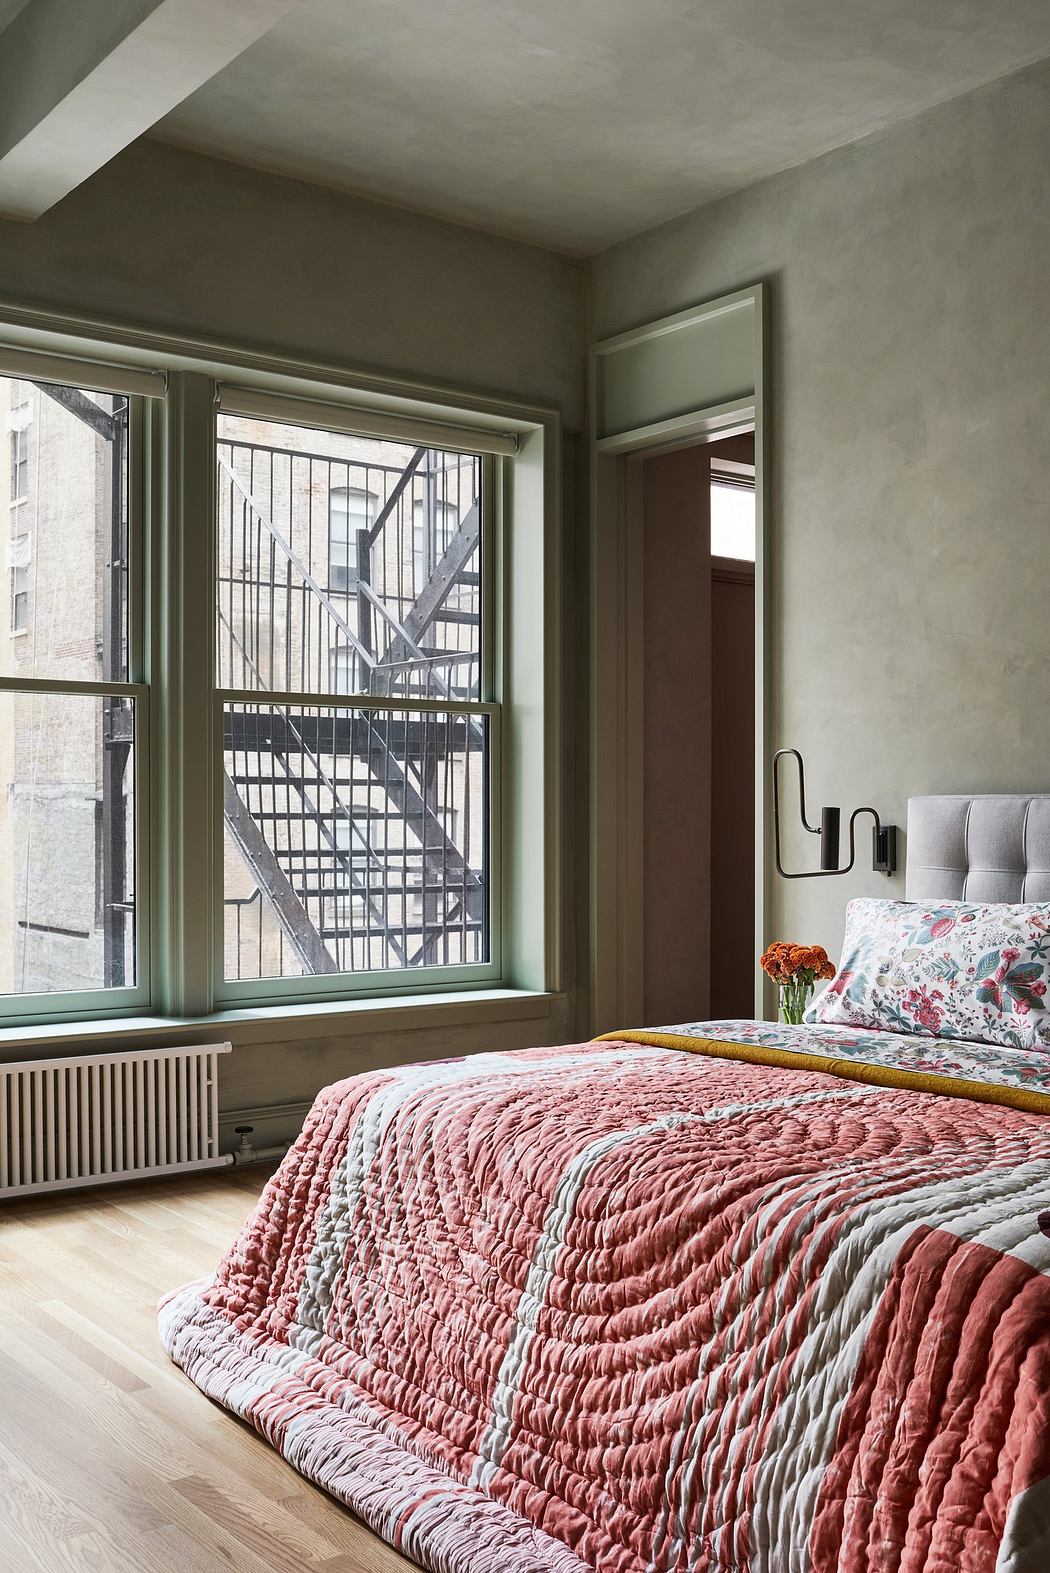 Cozy bedroom with a textured bedspread and a view of city buildings through large